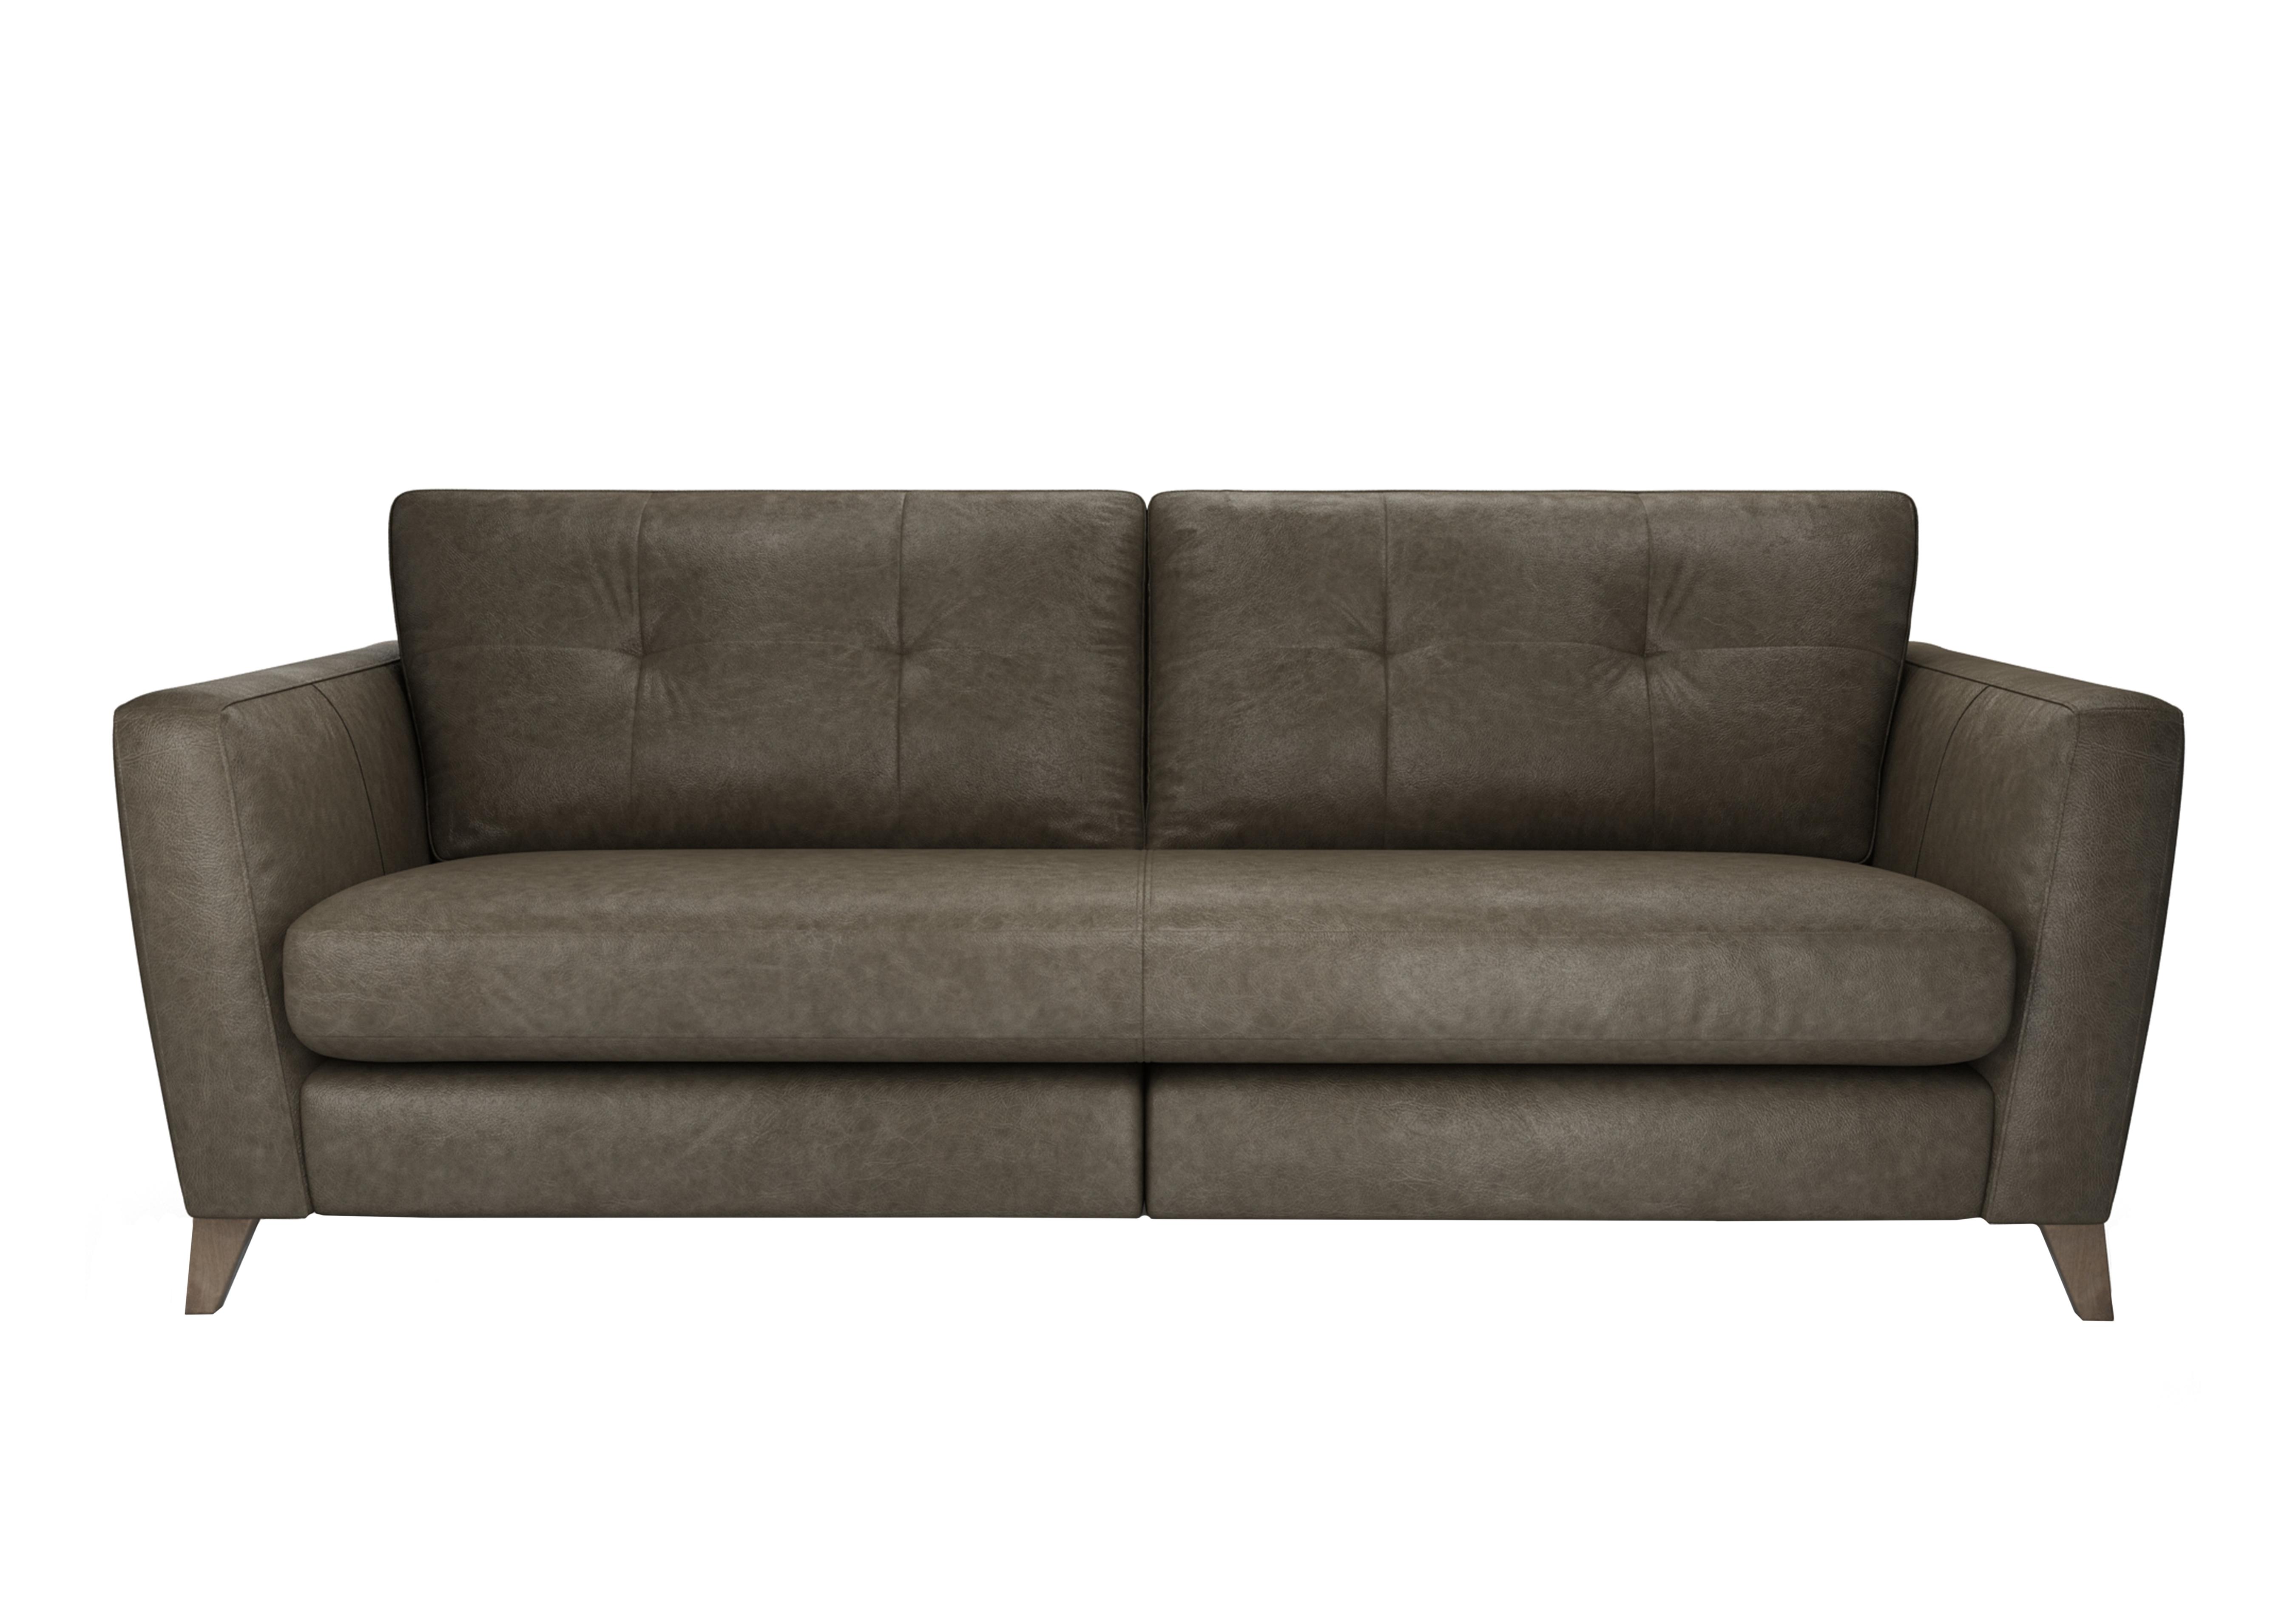 Hermione 4 Seater Leather Sofa in Gra189 Granite Wo Ft on Furniture Village